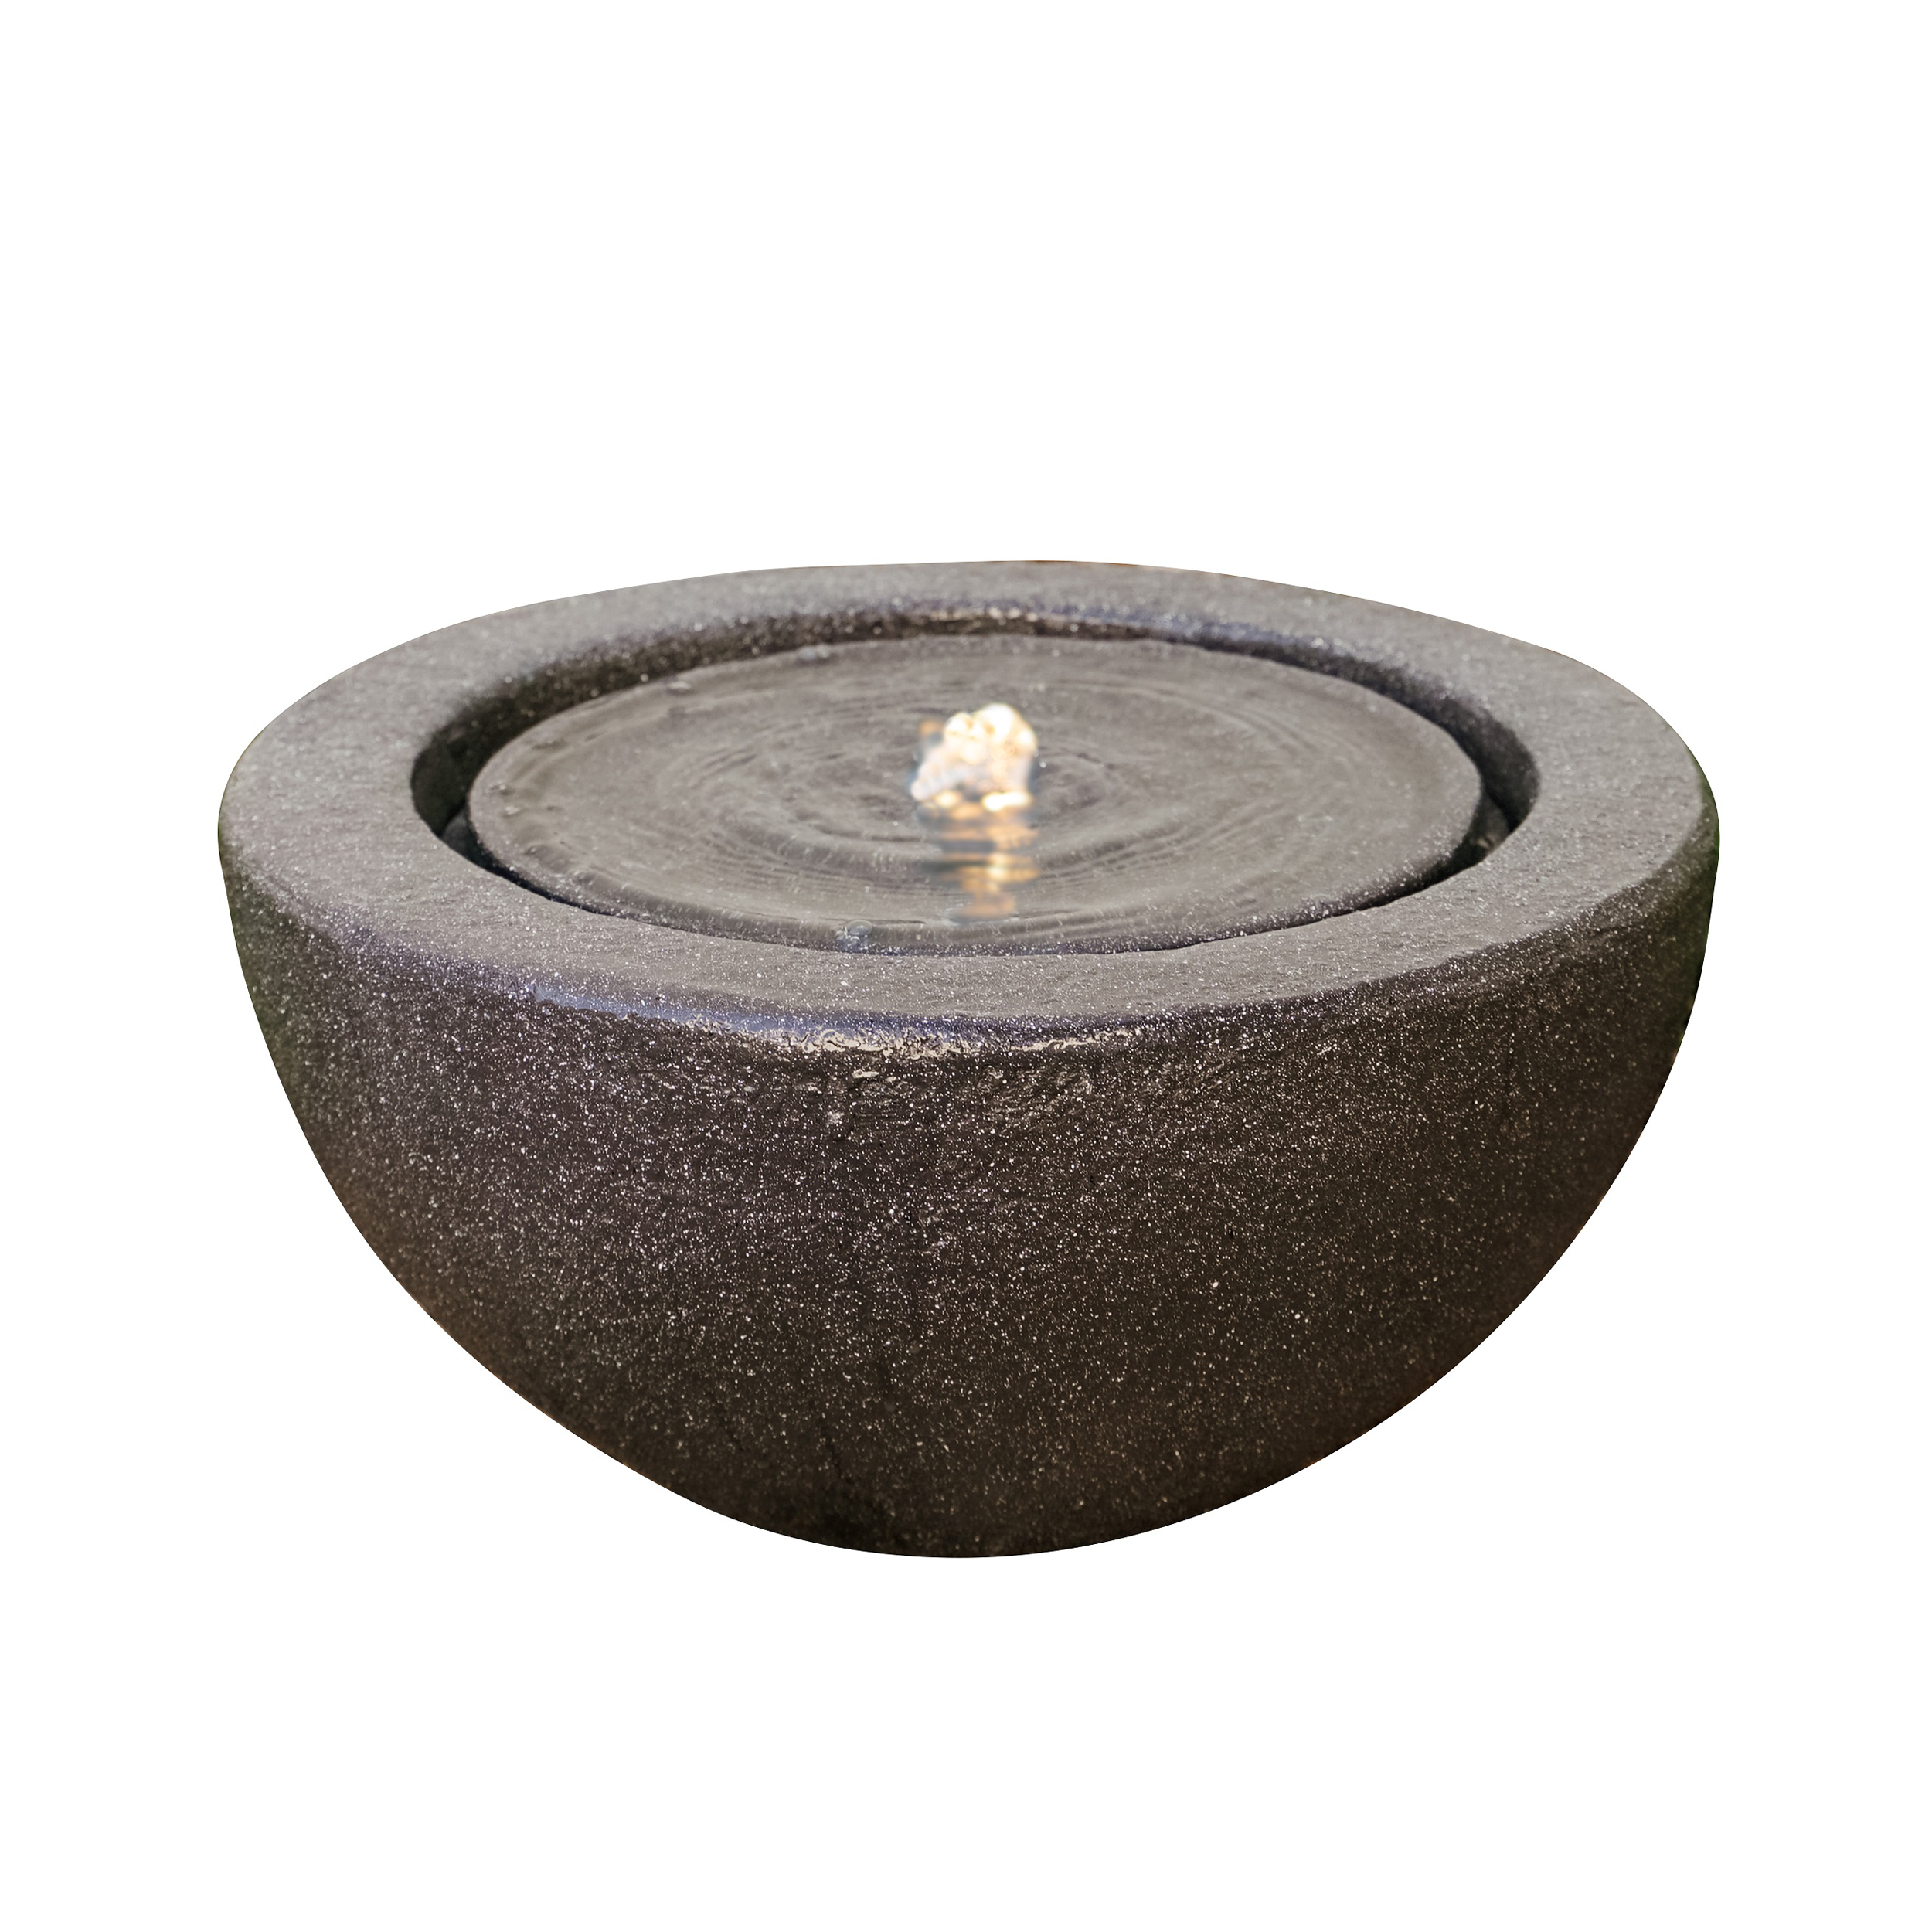 Discover our range of fountains for indoor/outdoor décor - from tabletop to circle & semi-sphere designs. Create a calming oasis with our garden water features. Shop Now!